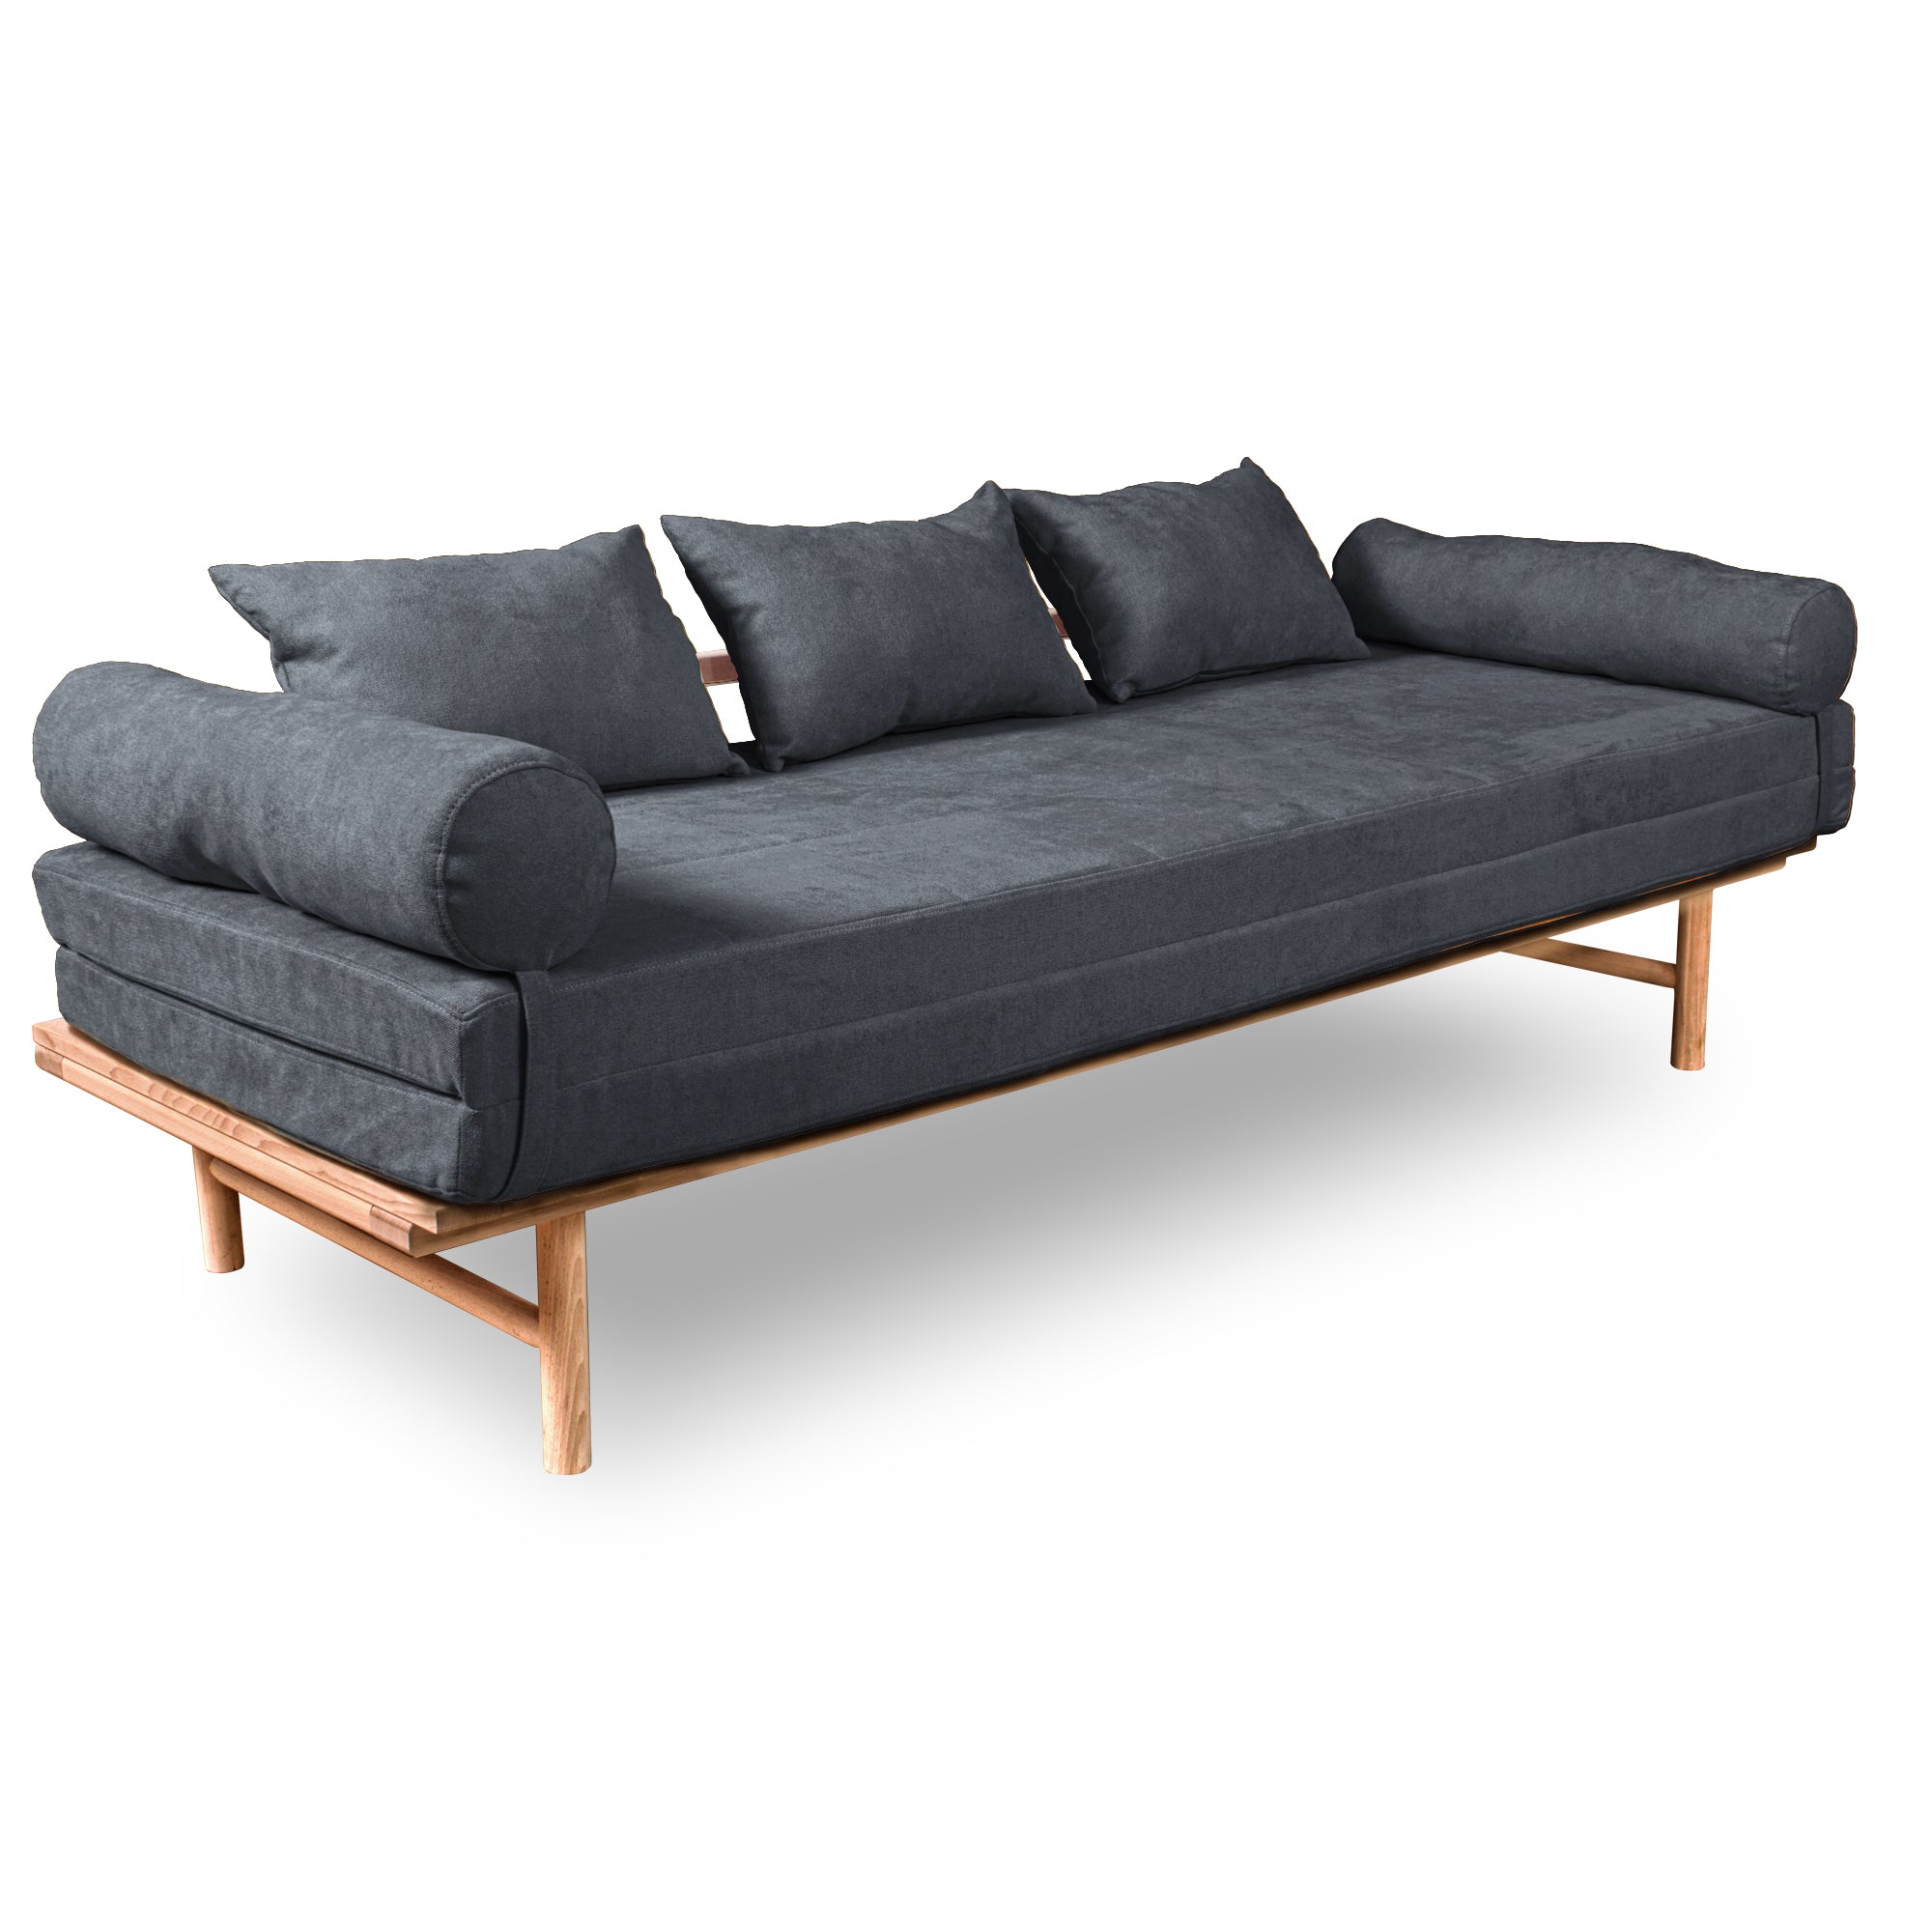 Le MAR Folding Daybed, Beech Wood Frame, Natural Colour-upholstery Le MAR Folding Daybed, Beech Wood Frame, Natural Colour-upholstery graphite